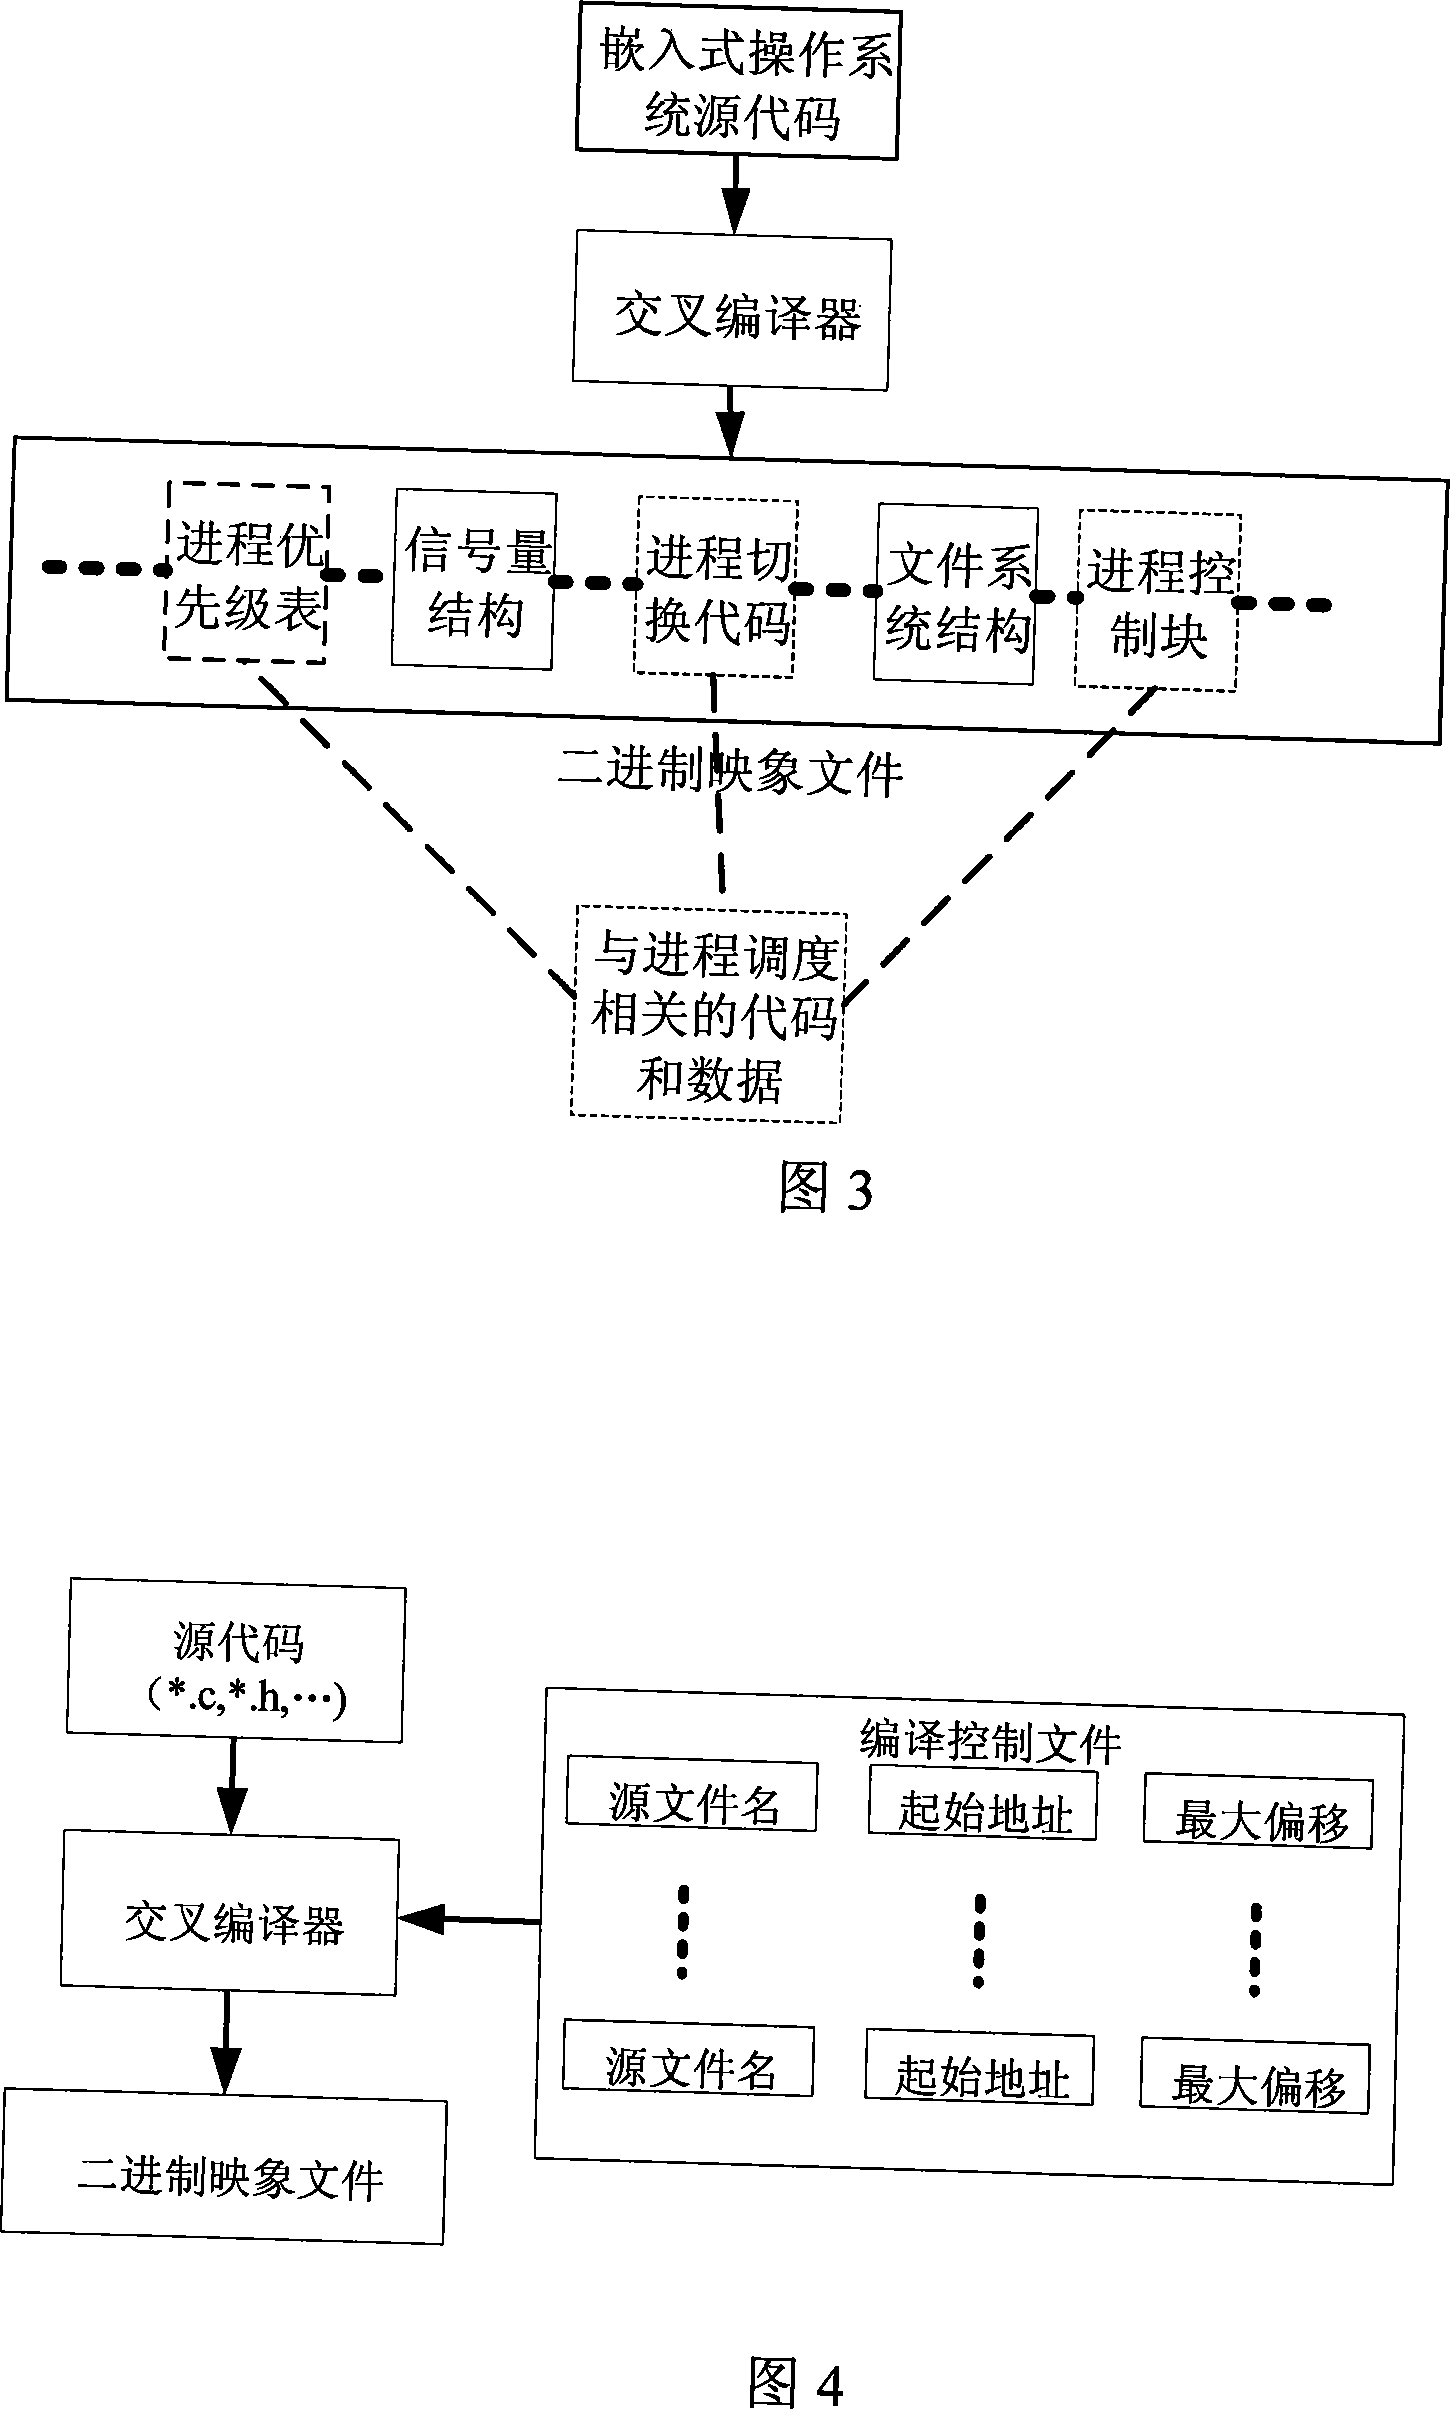 Method for optimizing embedded type operating system process scheduling based on SPM